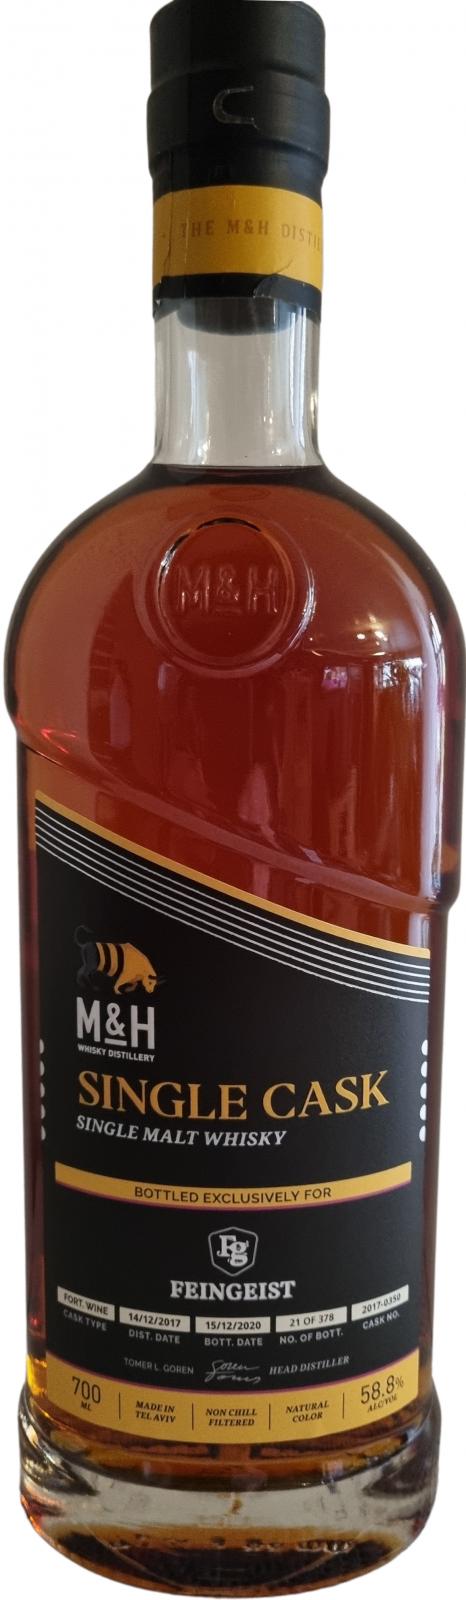 M&H 2017 Single Cask Exclusively For Feingeist Fort. Wine 2017-0350 58.8% 700ml